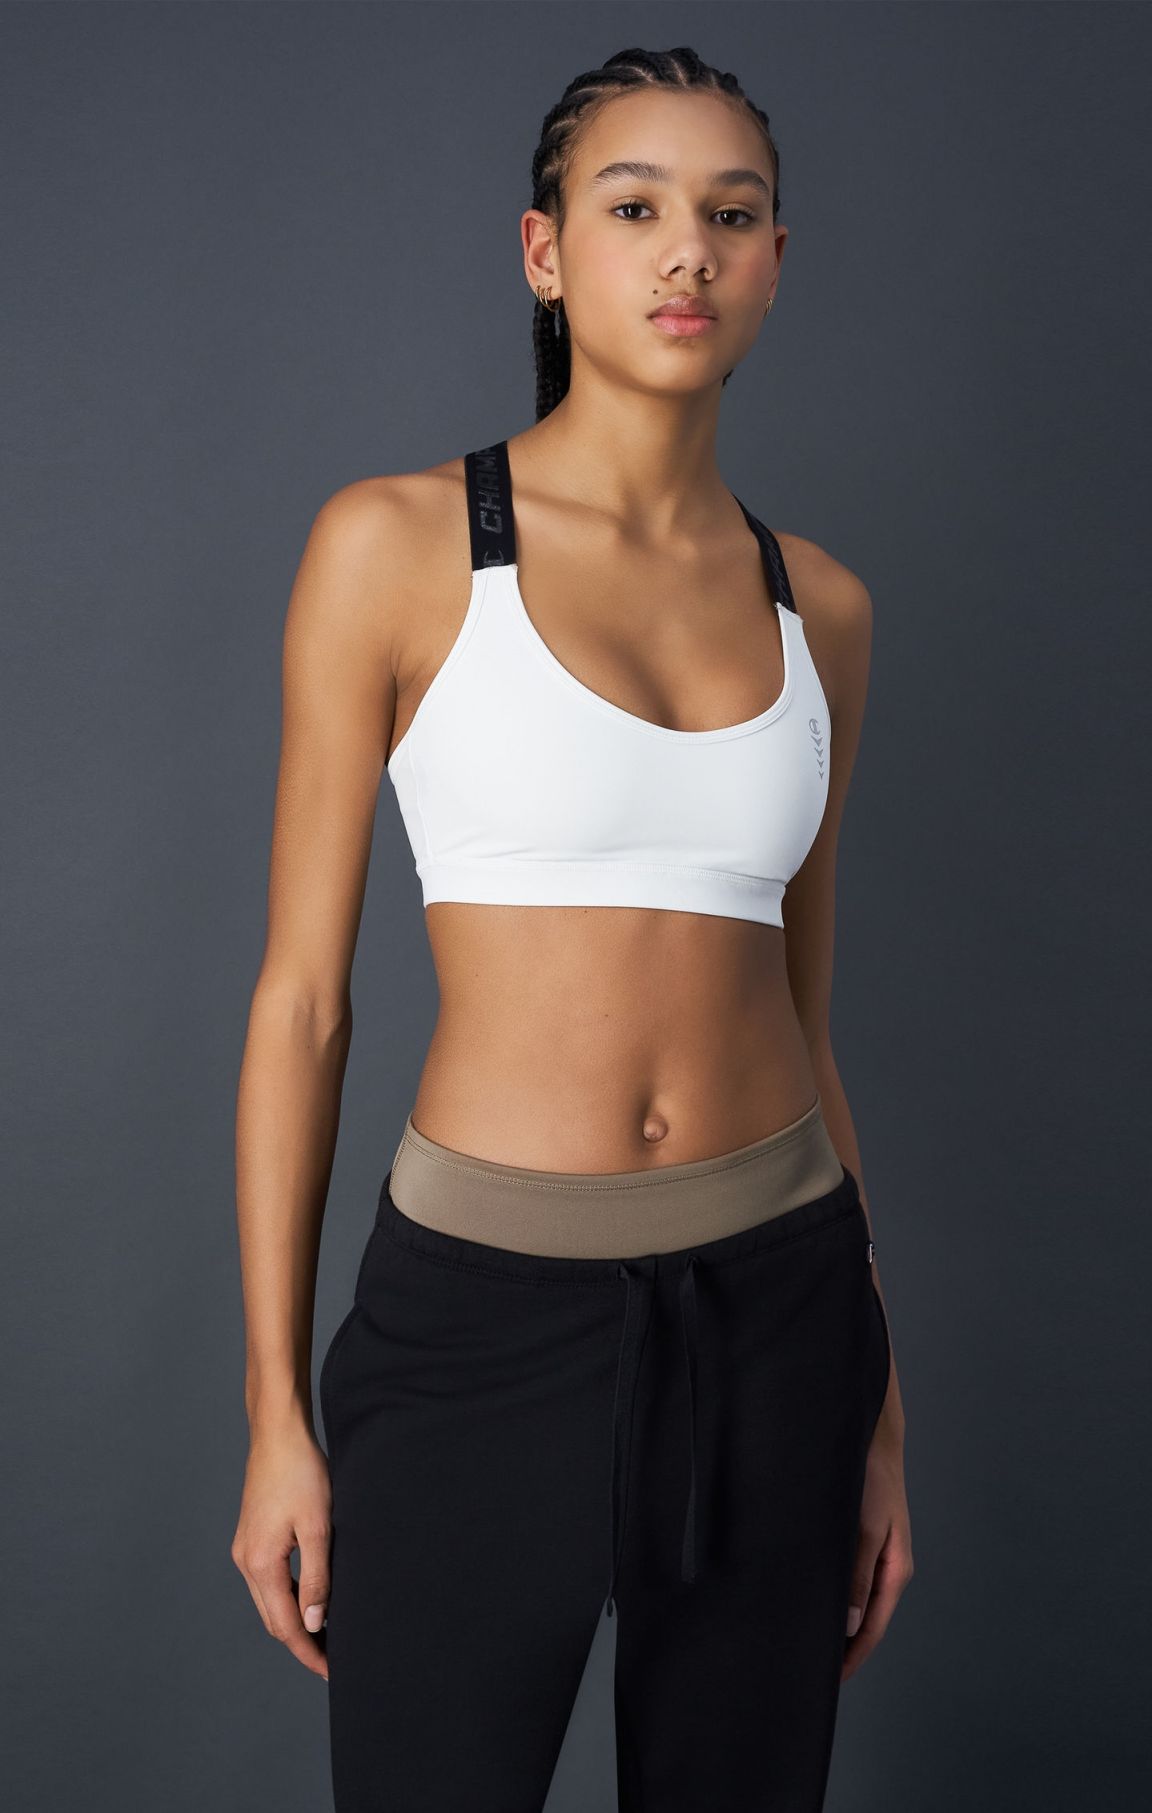 CHAMPION DOUBLE DRY ABSOLUTE WORKOUT II SPORTS BRA BLUE #6715 X